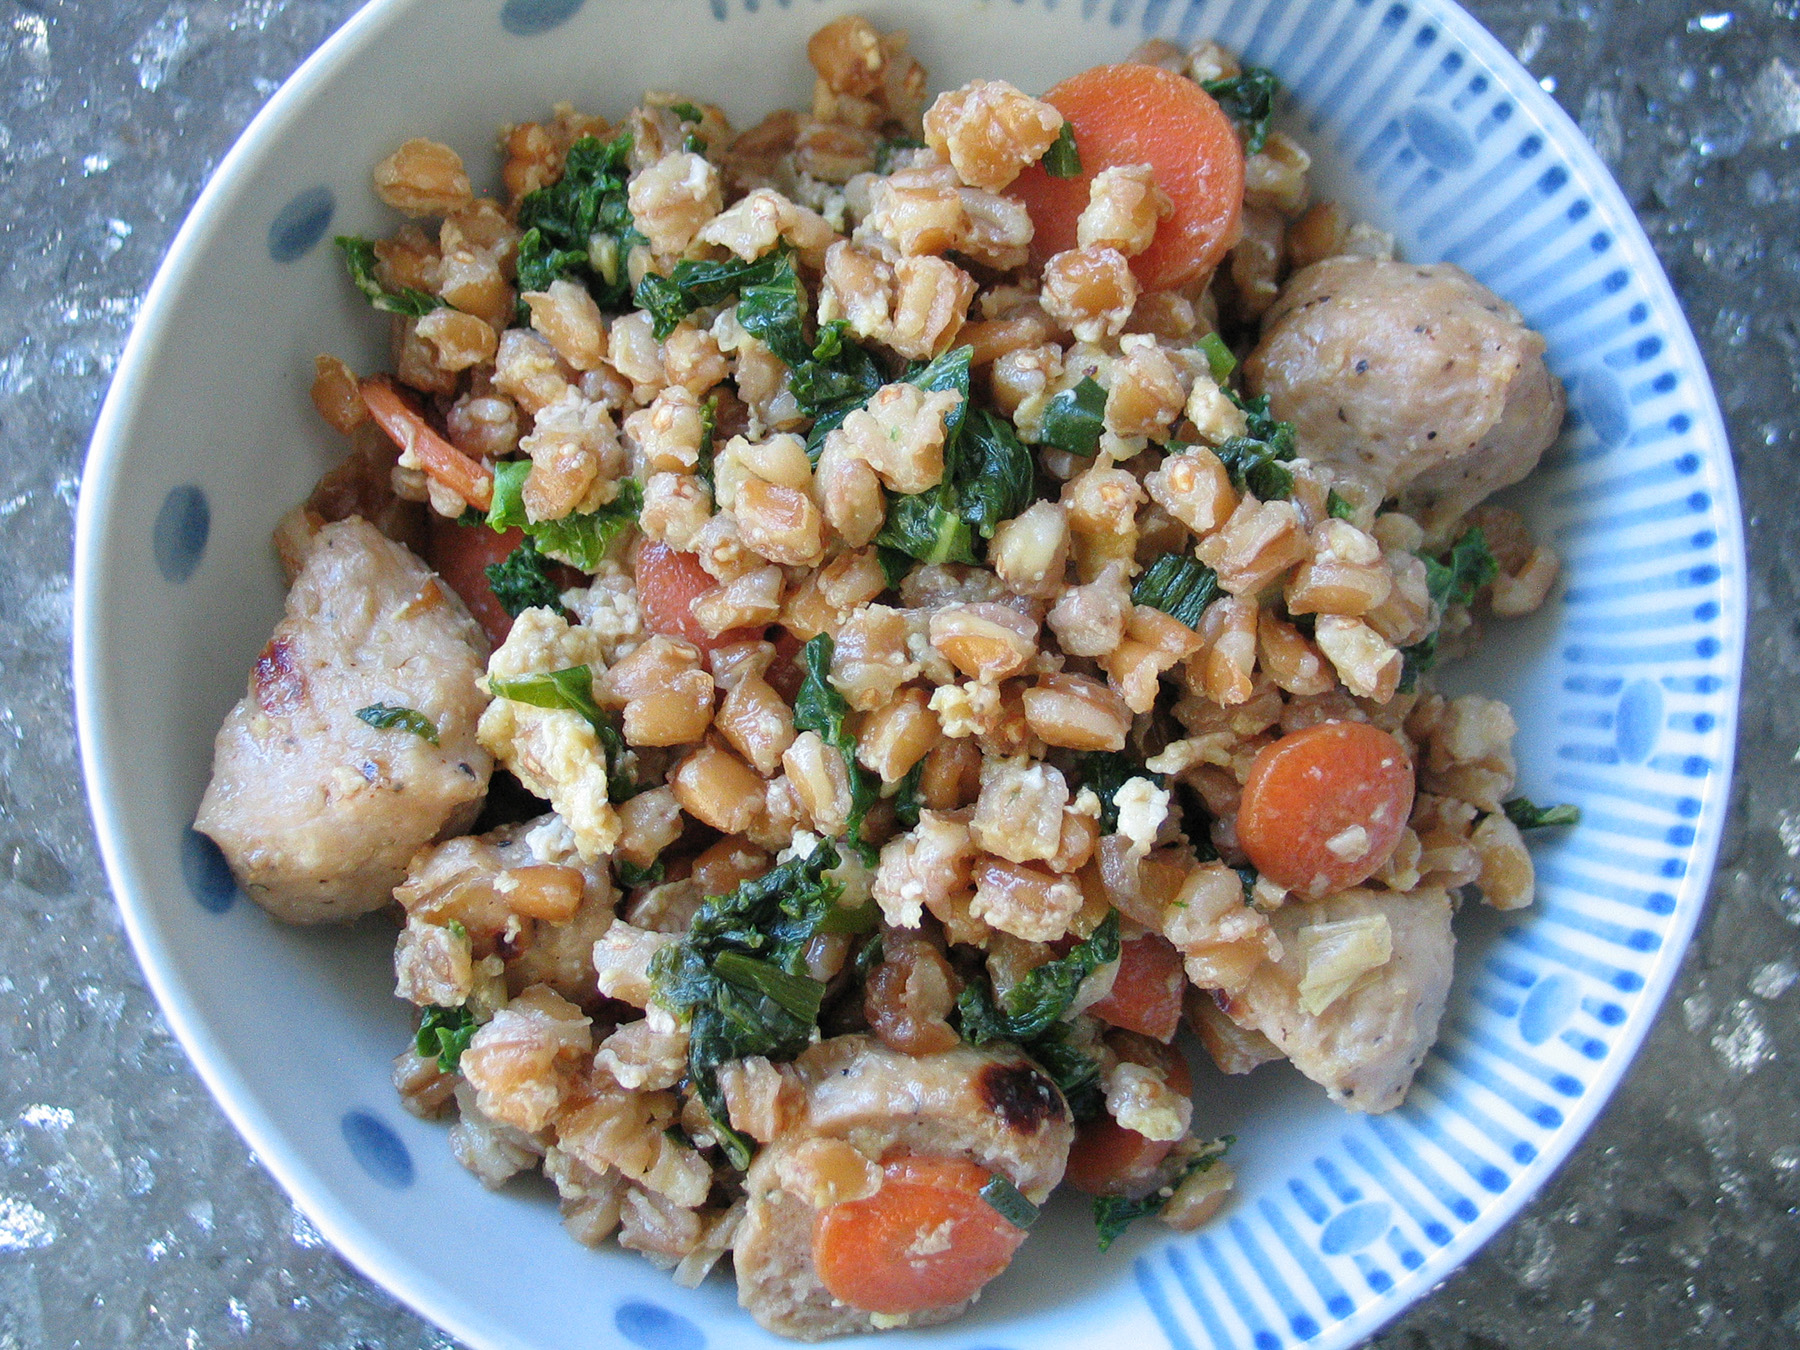 Kale and Sausage Fried ‘Rice’